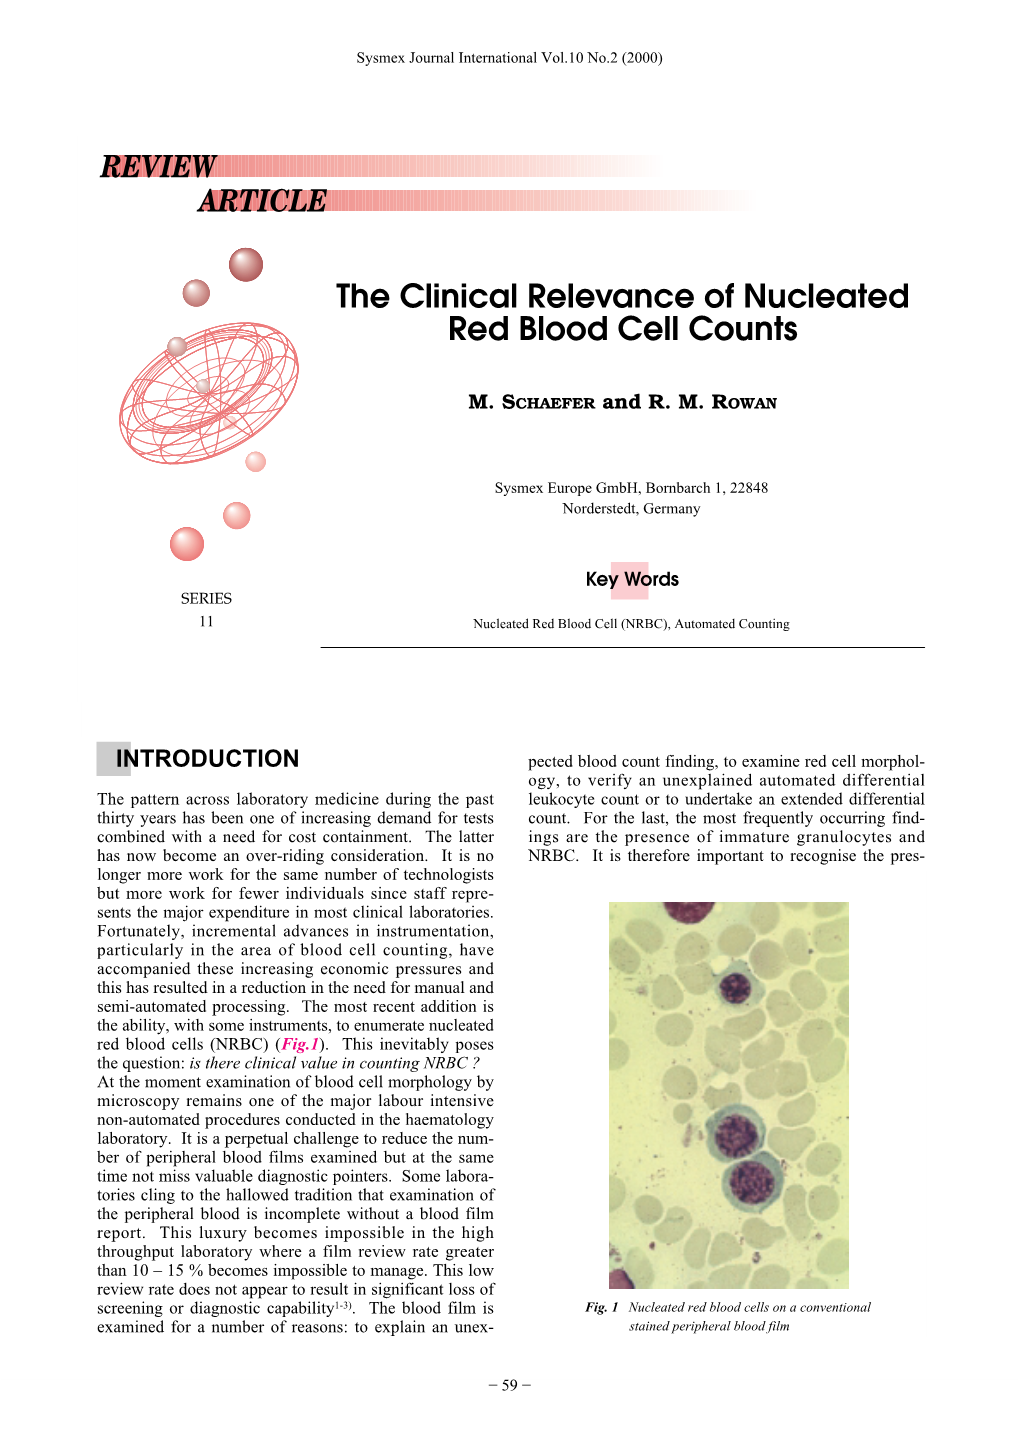 The Clinical Relevance of Nucleated Red Blood Cell Counts